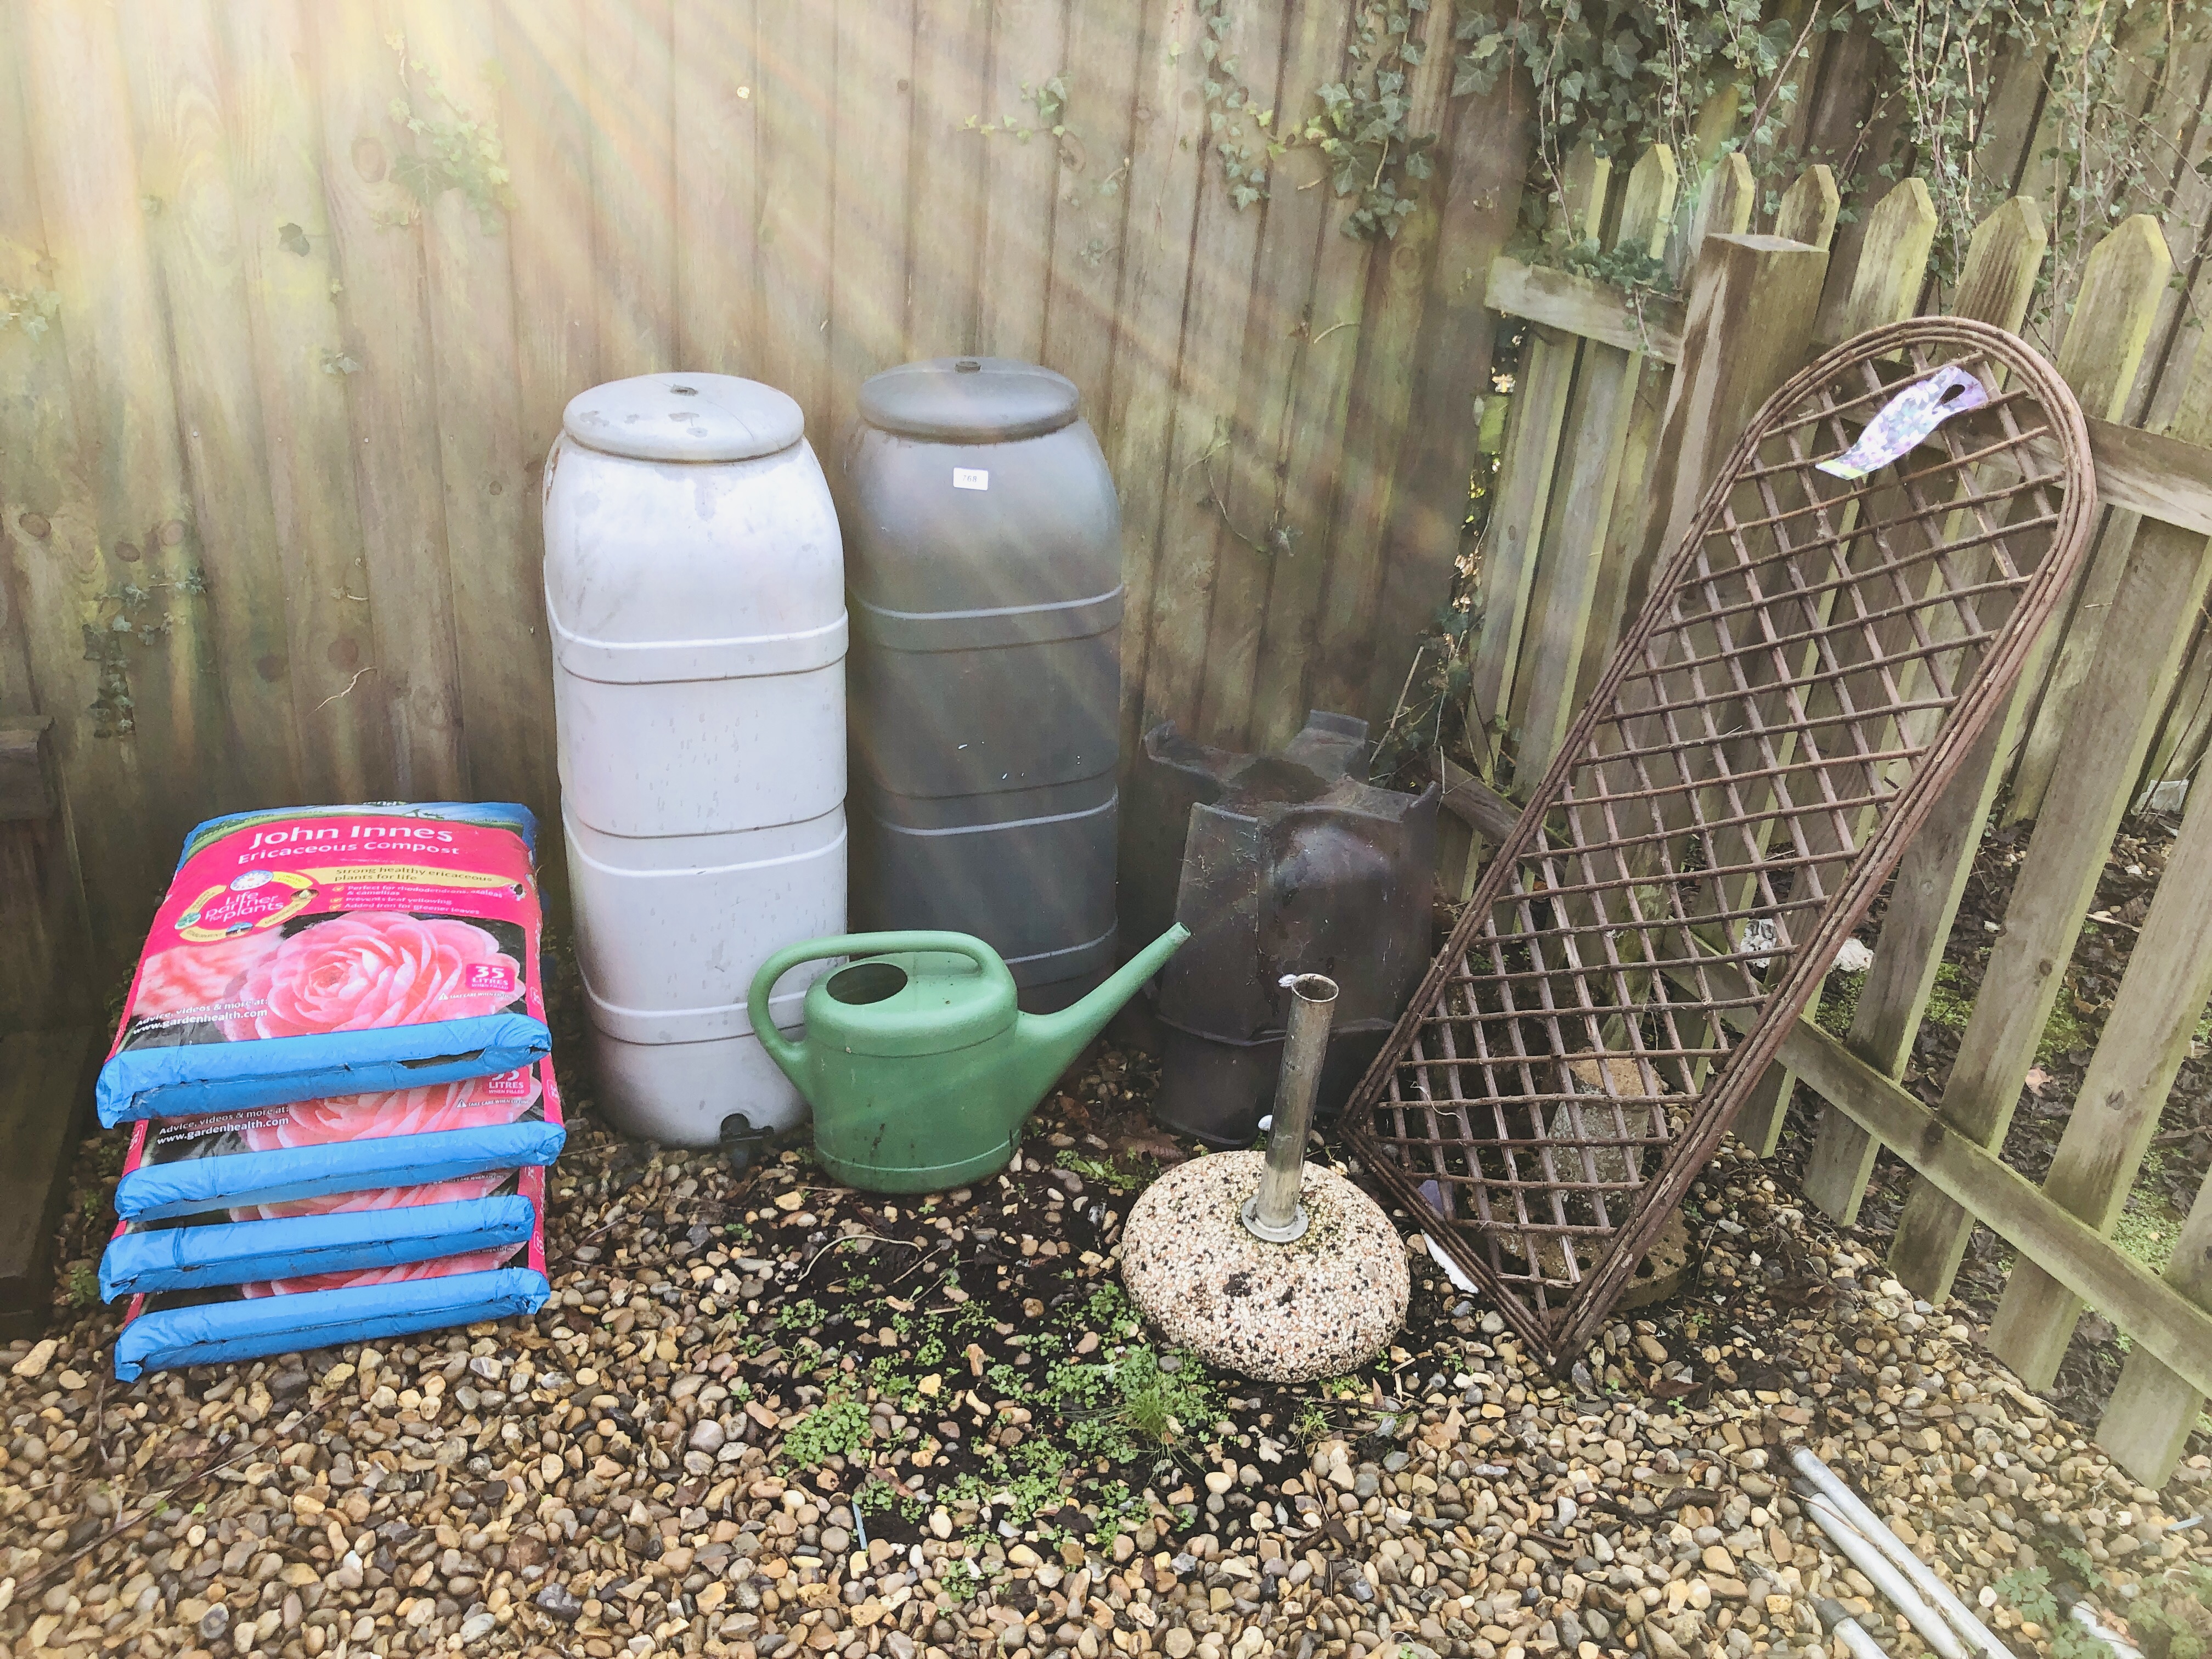 FOUR BAGS OF 35 LITRE JOHN INNES ERICACEOUS COMPOST, 2 X WATER BUTTS, PARASOL STAND, ETC.